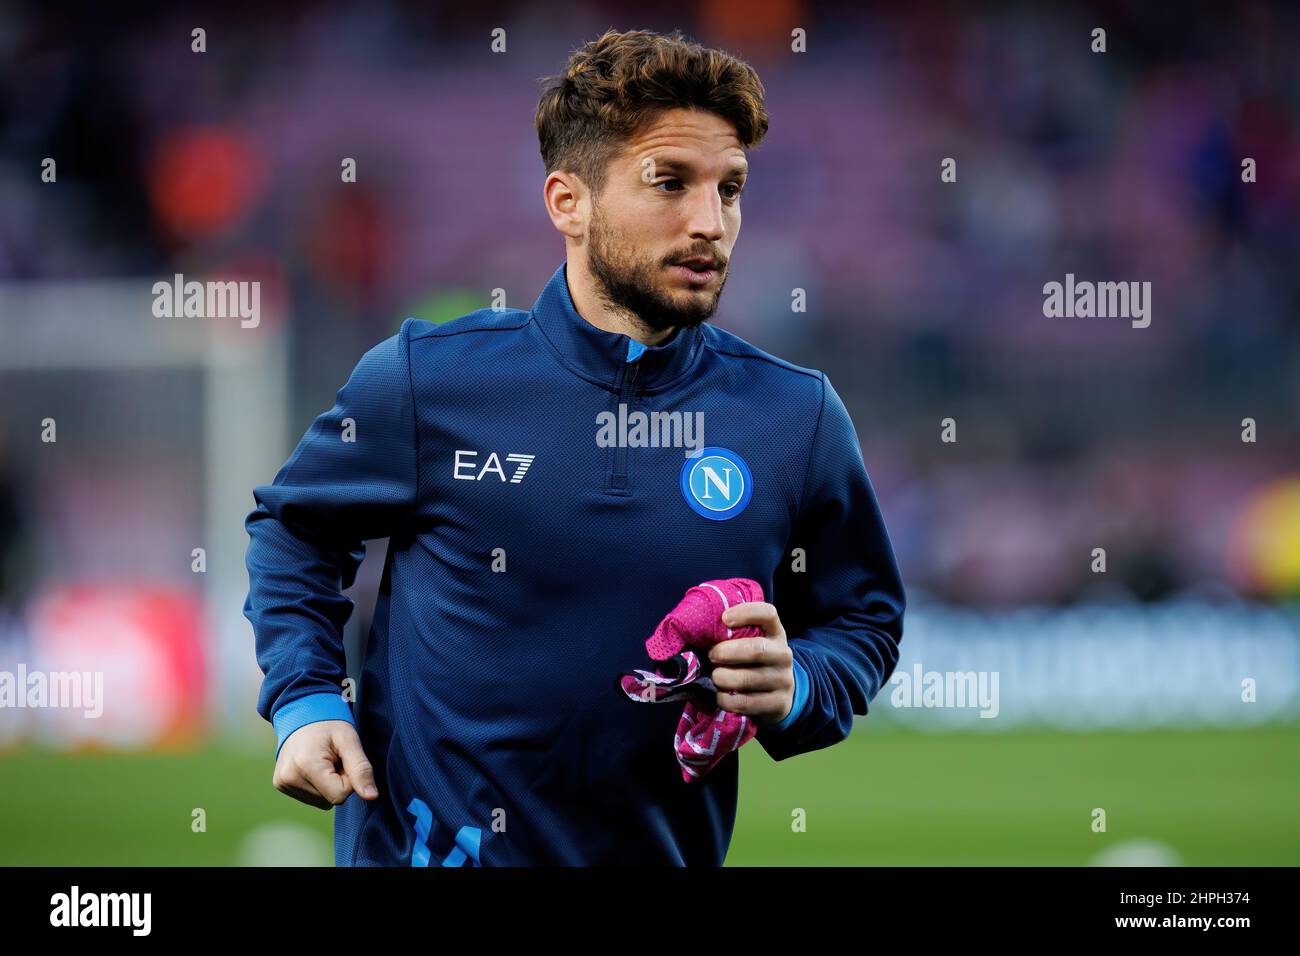 BARCELONA - FEB 17: Dries Mertens warms up prior to the Uefa Europa League match between FC Barcelona and SSC Napoli at the Camp Nou Stadium on Februa Stock Photo